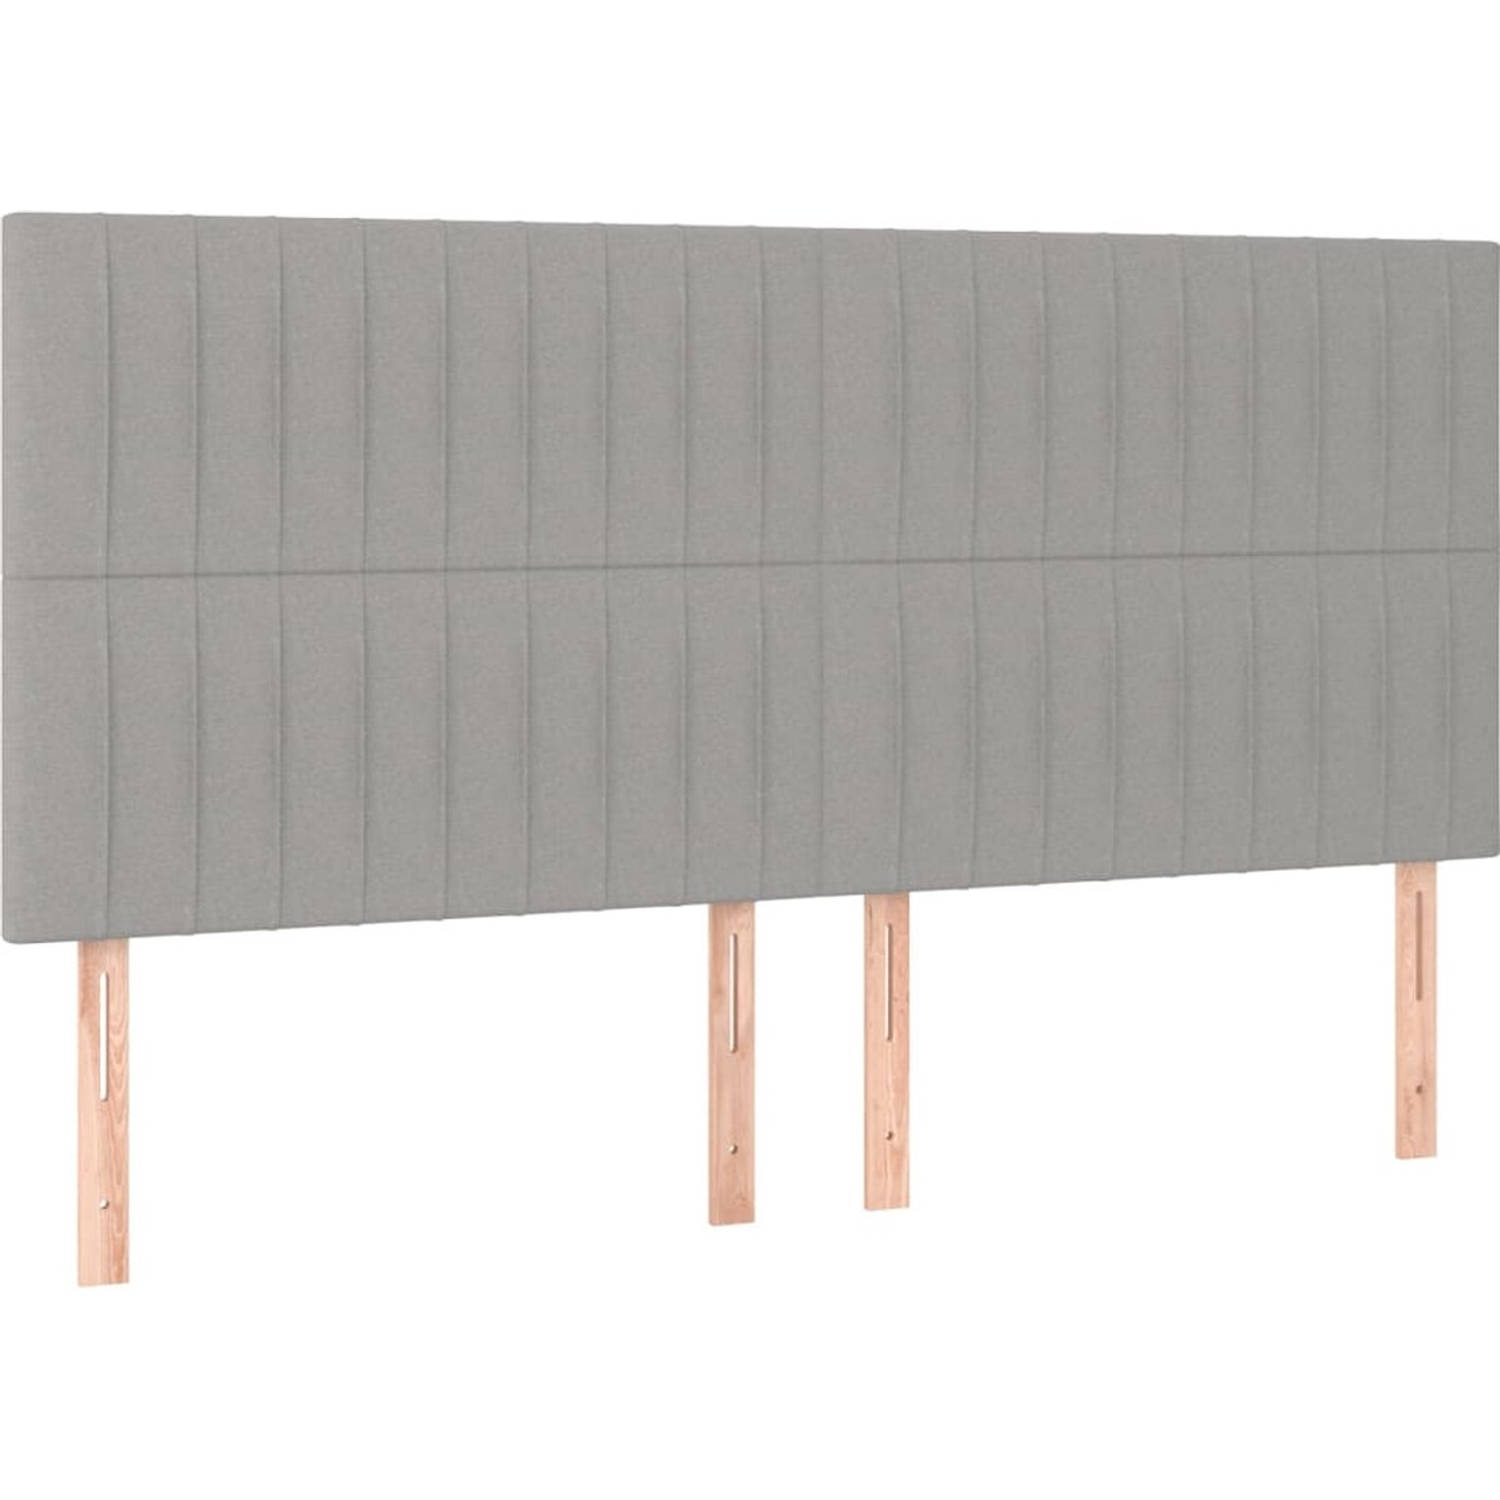 The Living Store Boxspringbed - The Living Store - Bed - 203x203x118/128cm - Lichtgrijs - Pocketvering matras